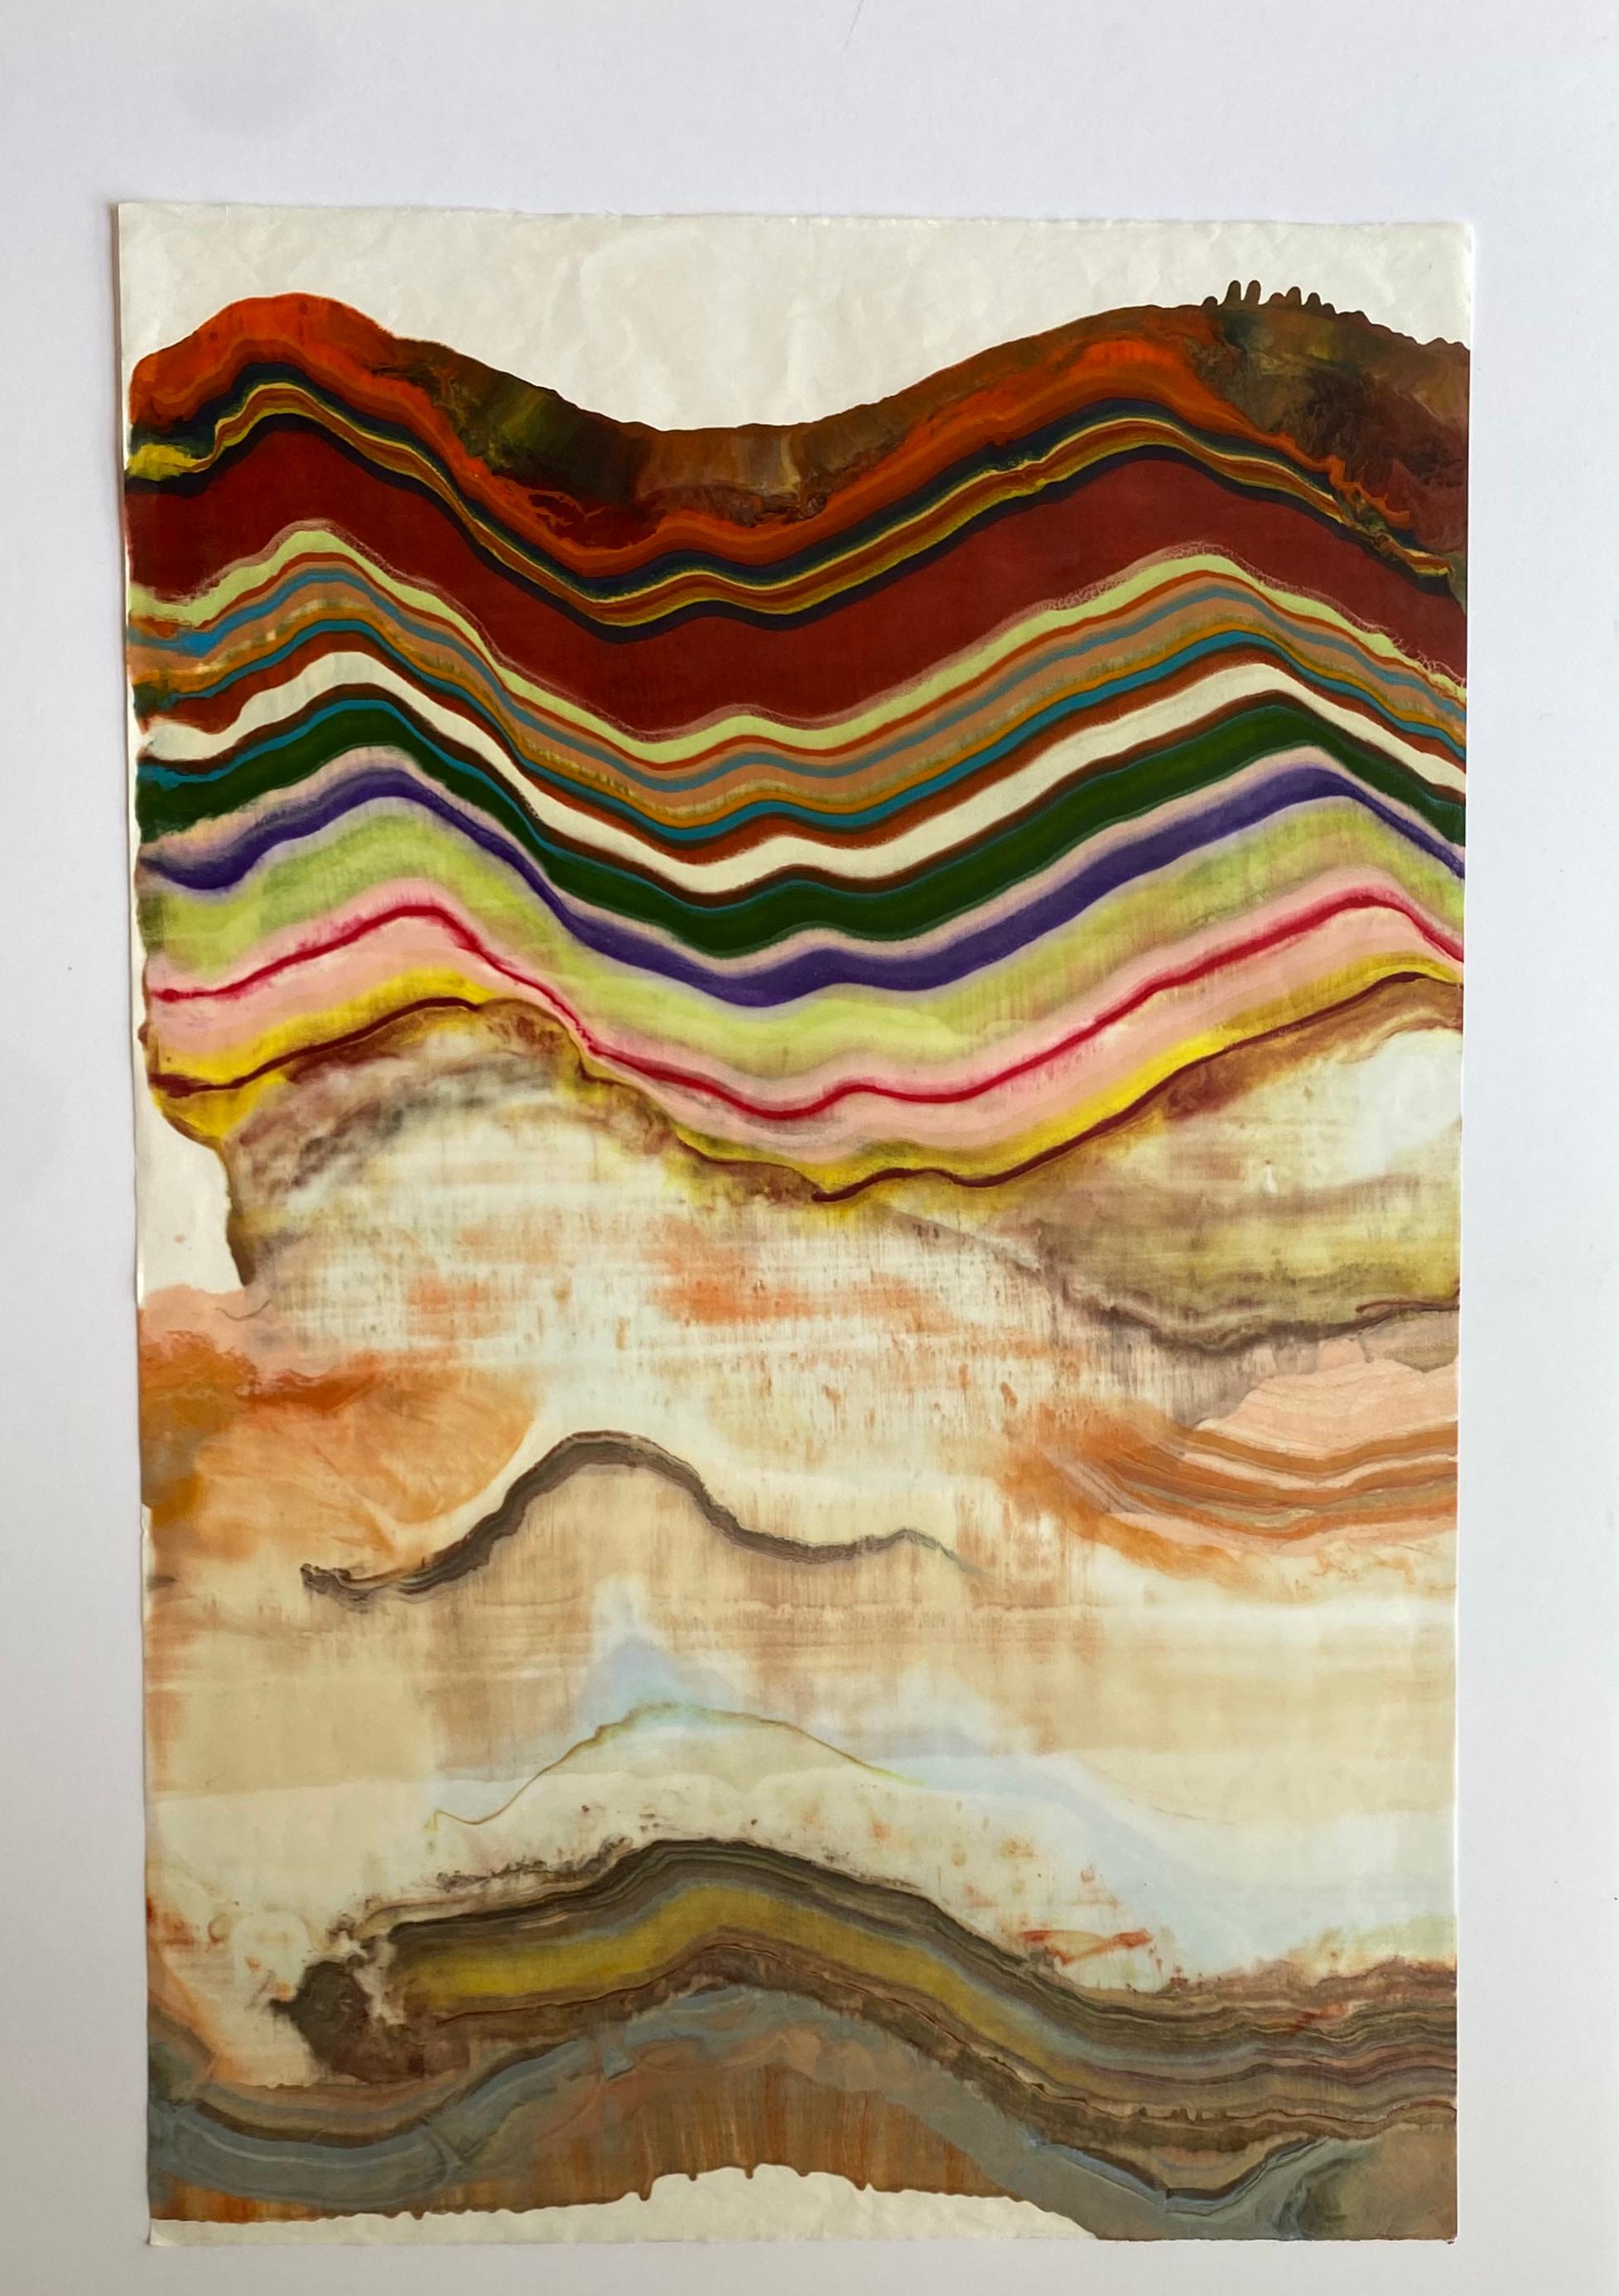 Ex Uno Plures Thirteen, Apricot, Magenta, Dark Red Umber, Hunter Green, Yellow - Print by Laura Moriarty